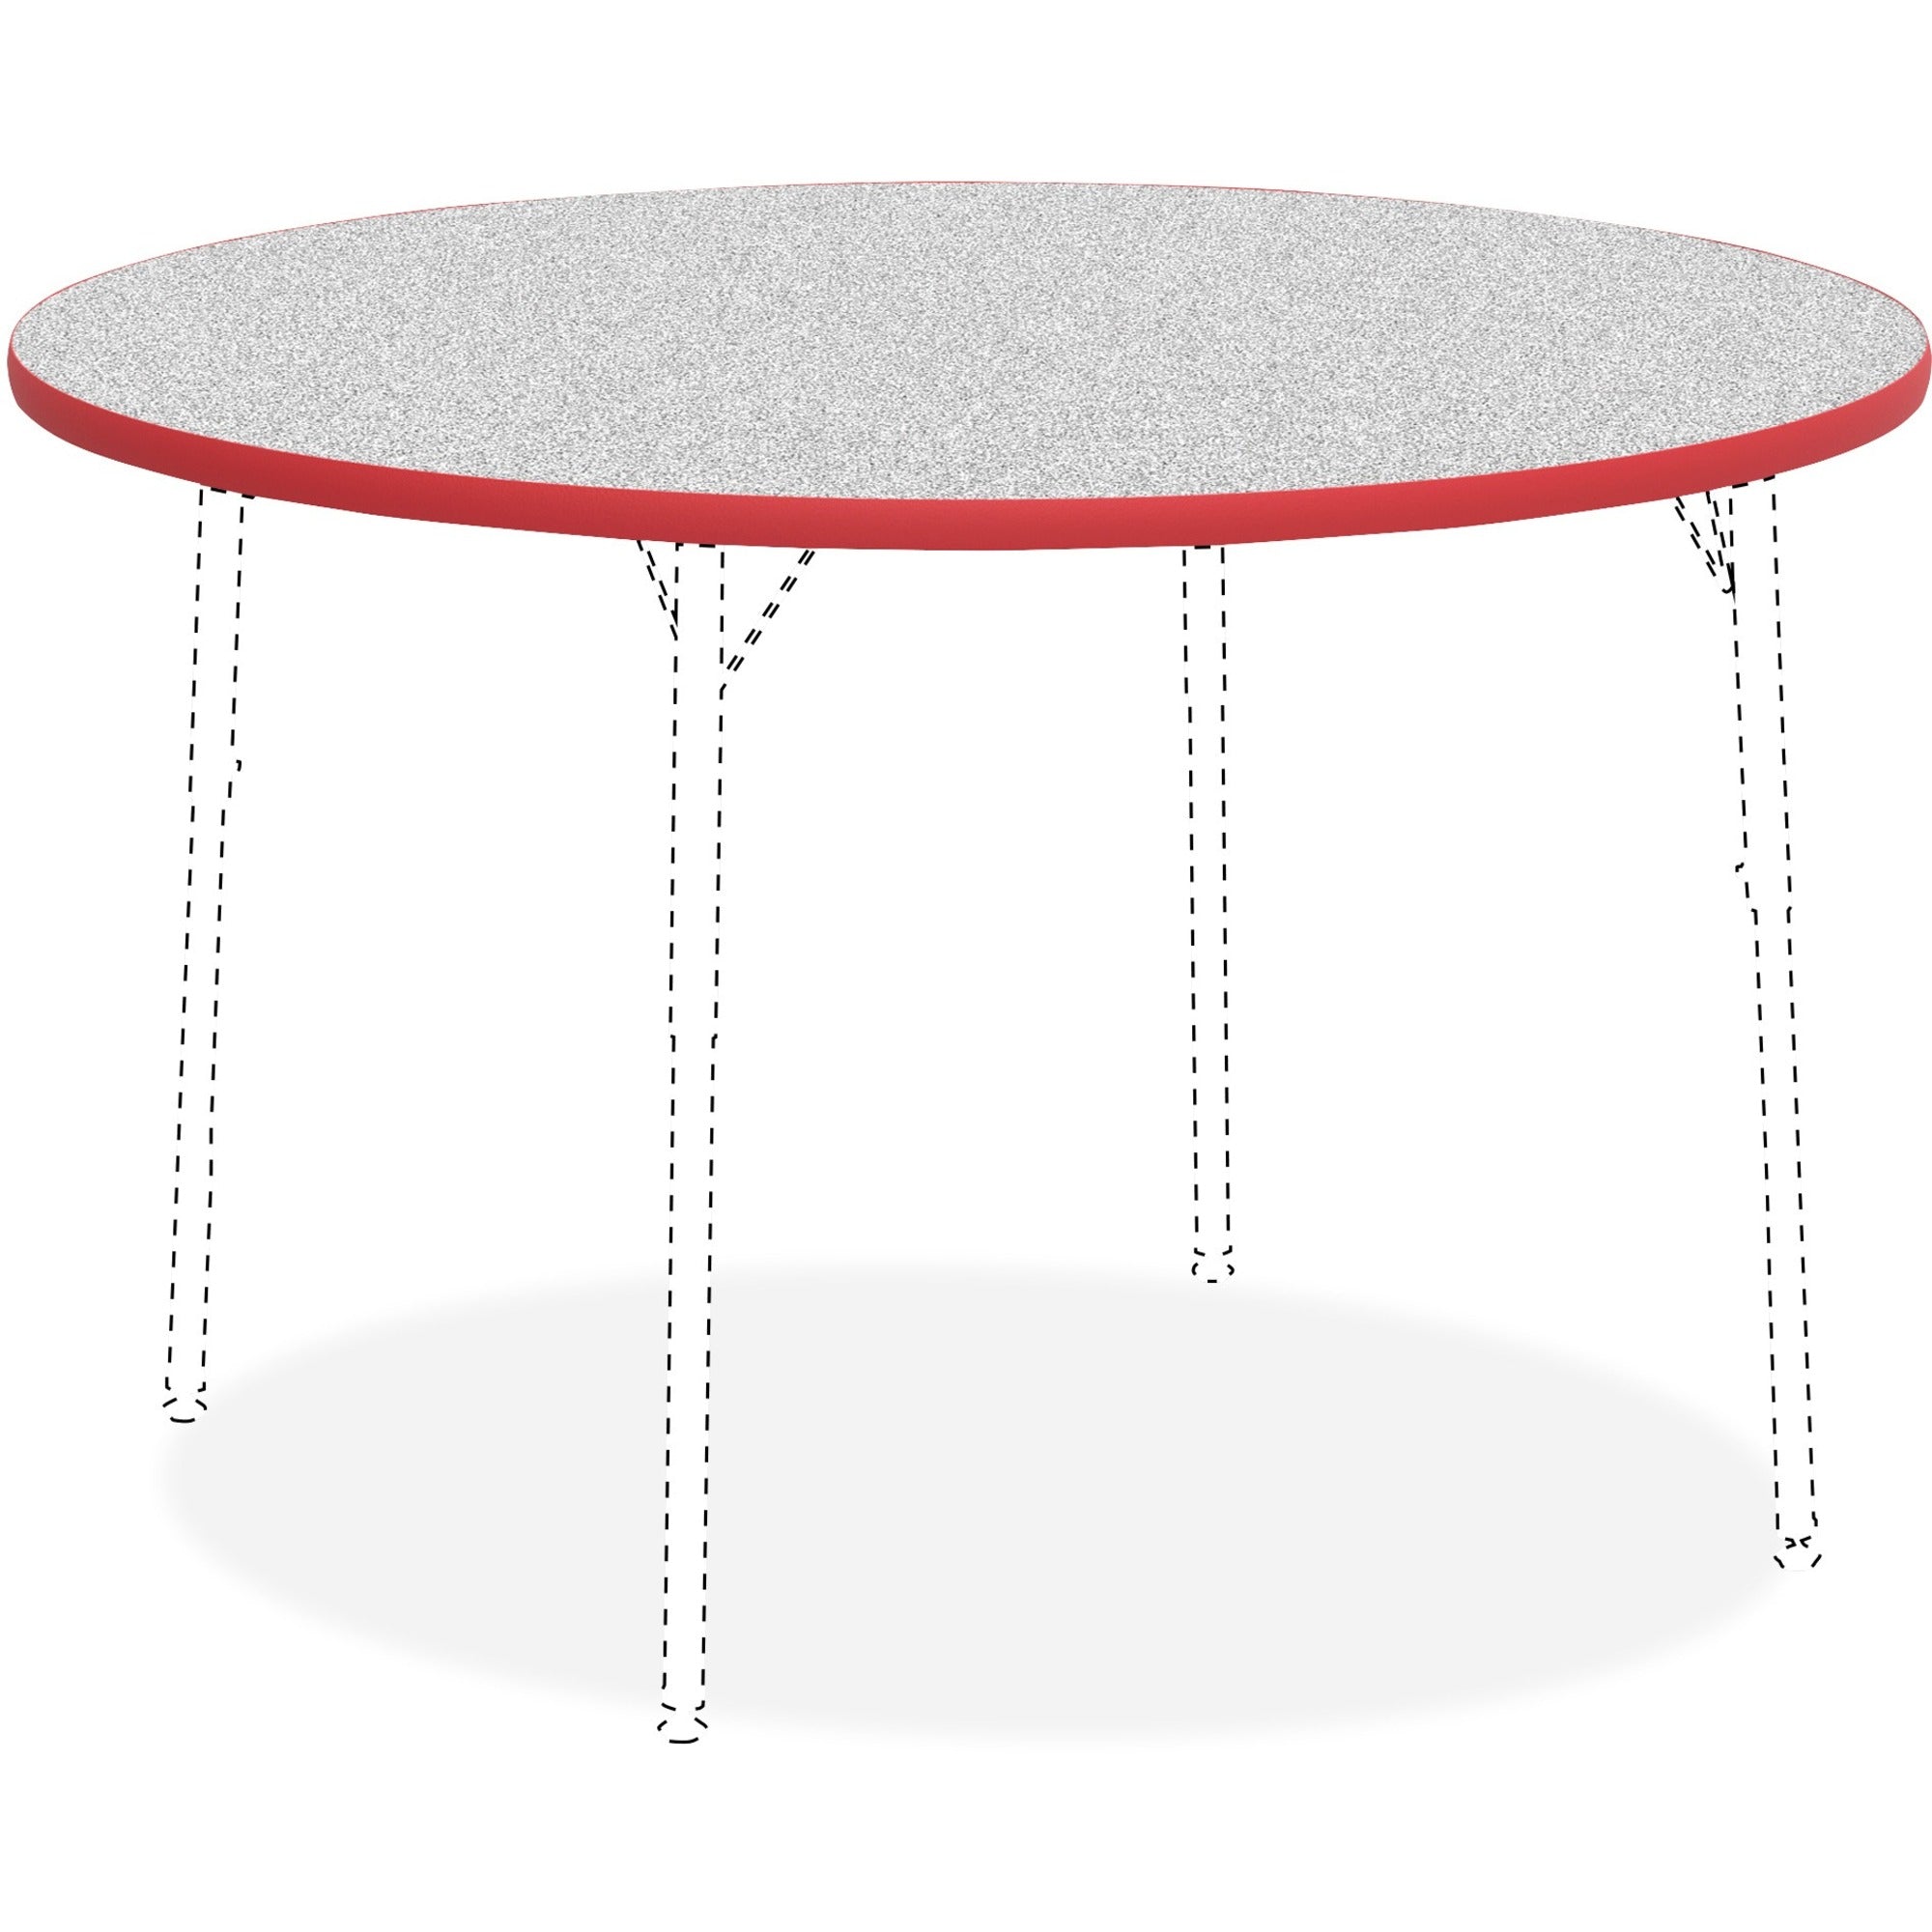 lorell-classroom-activity-tabletop-for-table-topgray-nebula-round-high-pressure-laminate-hpl-top-x-113-table-top-thickness-x-48-table-top-diameter-assembly-required-1-each_llr99923 - 1